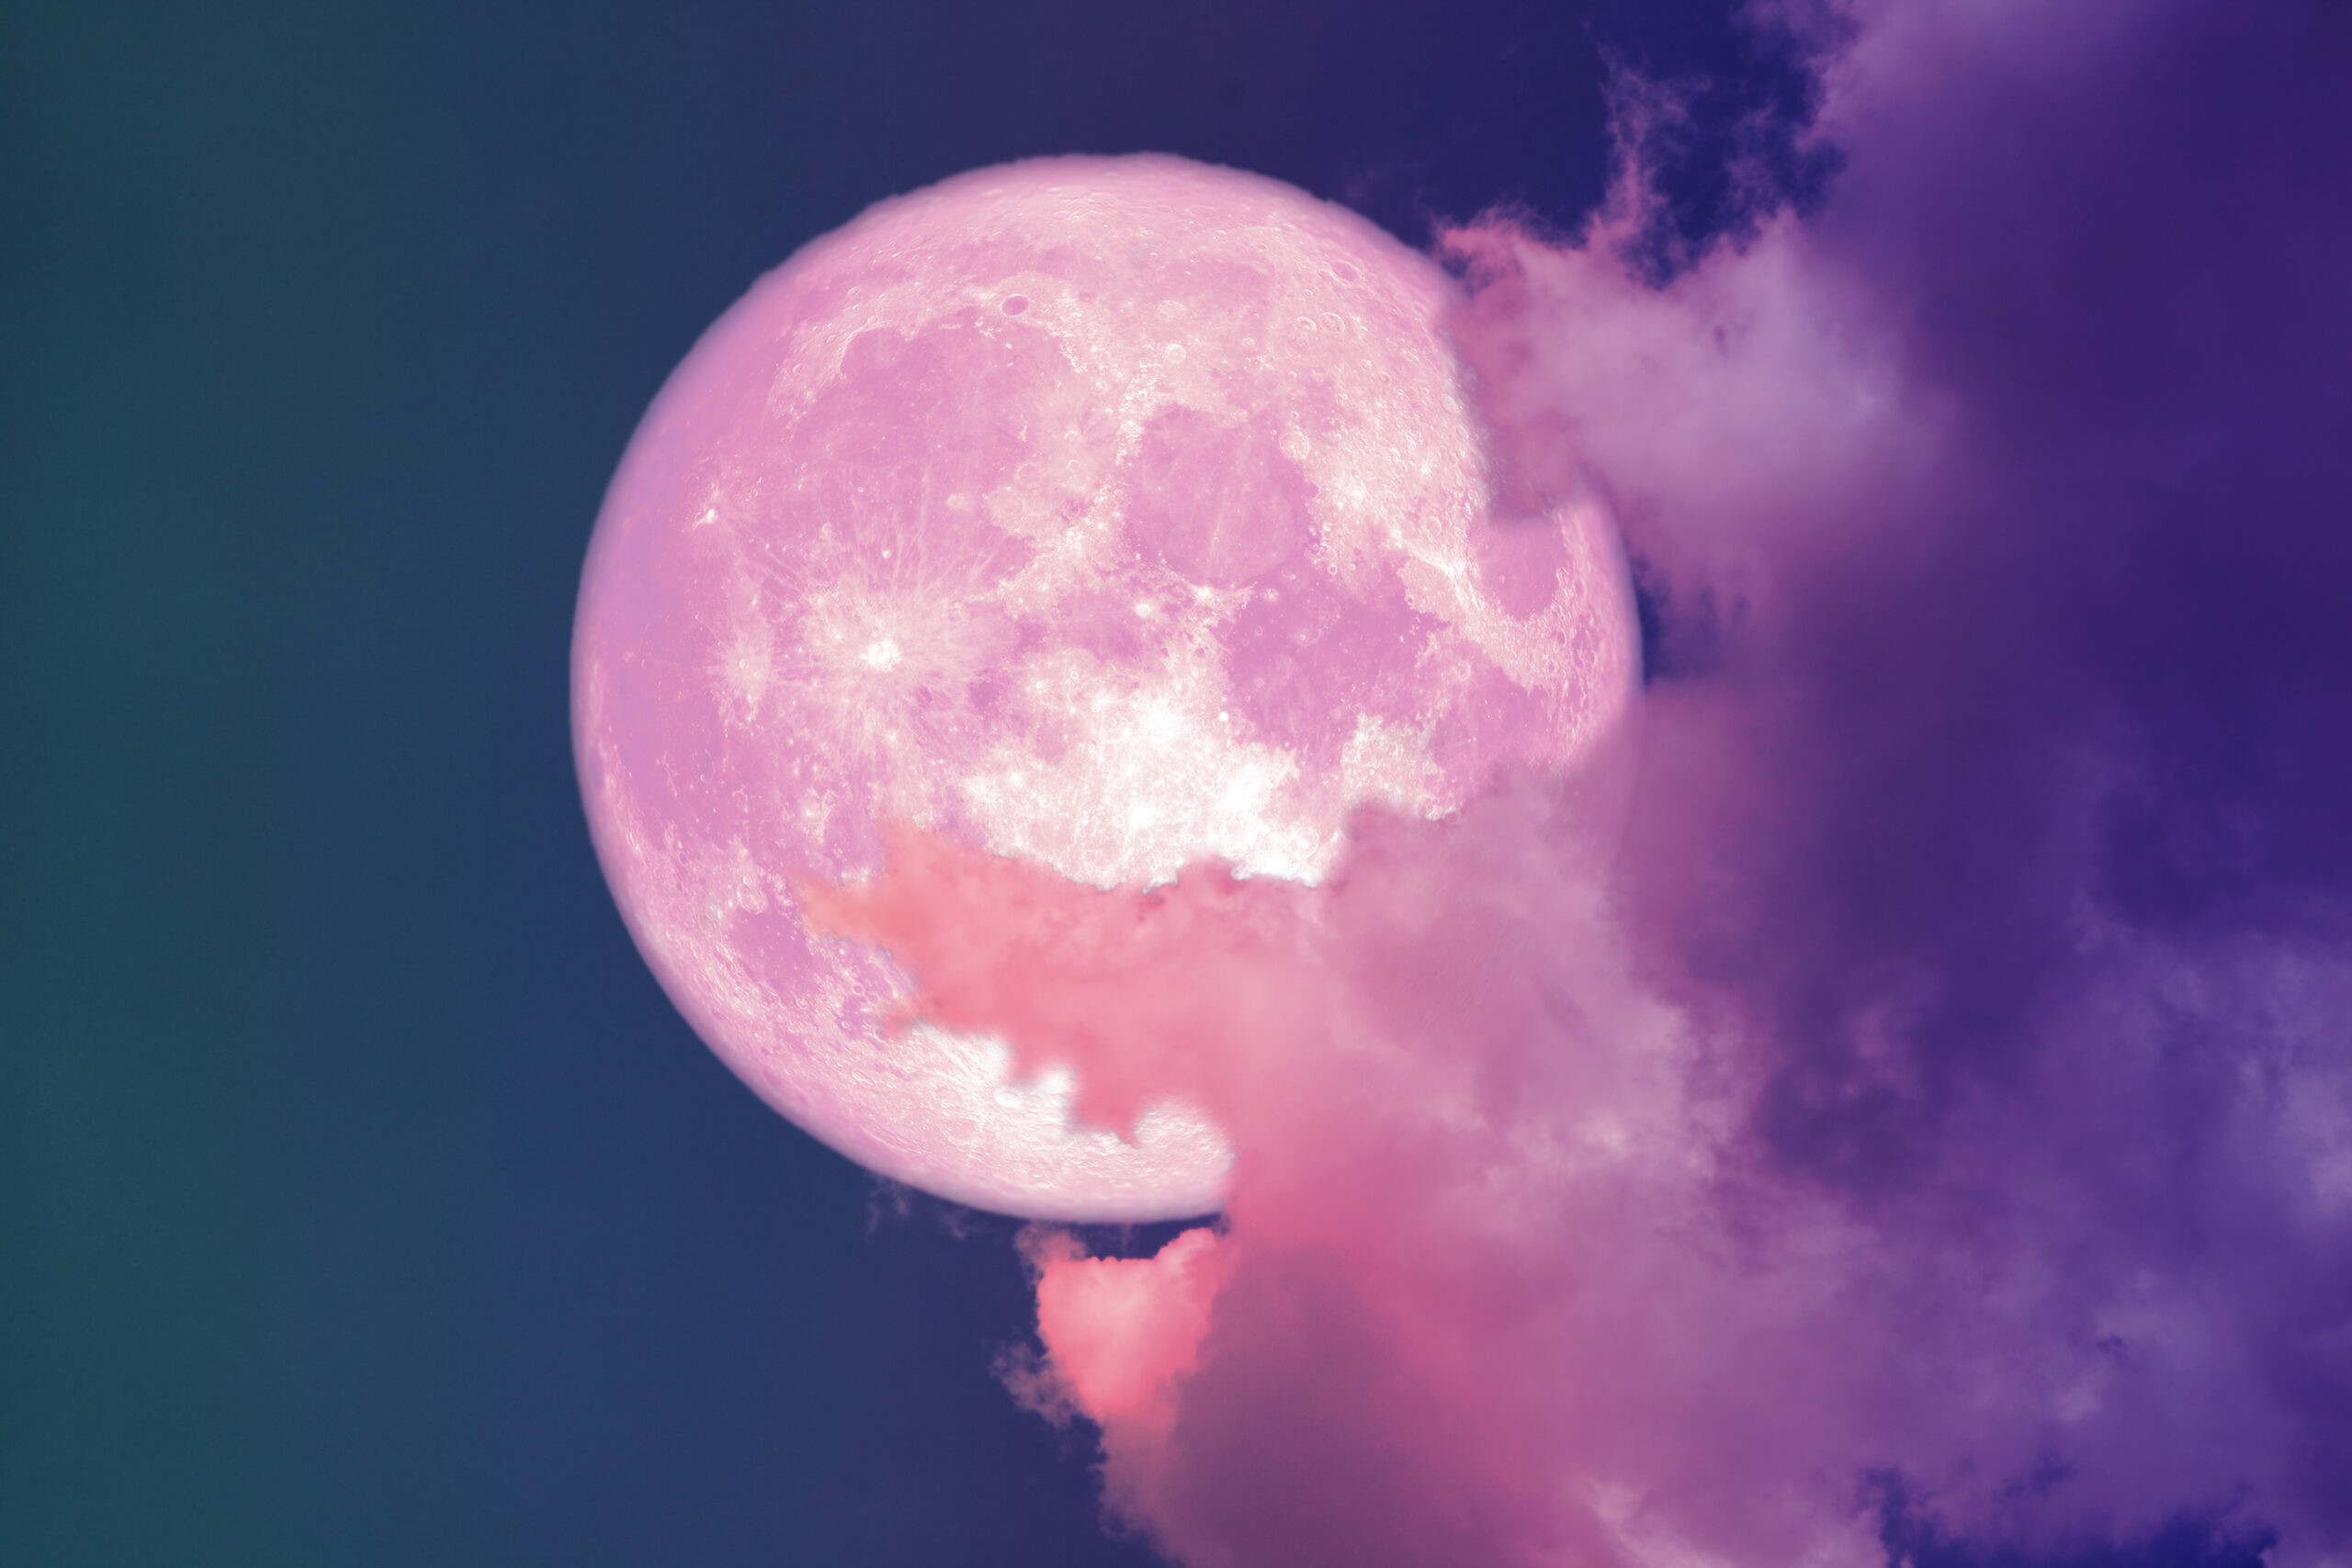 Super,Full,Pink,Moon,Back,Silhouette,Colorful,Sky,,Elements,Of